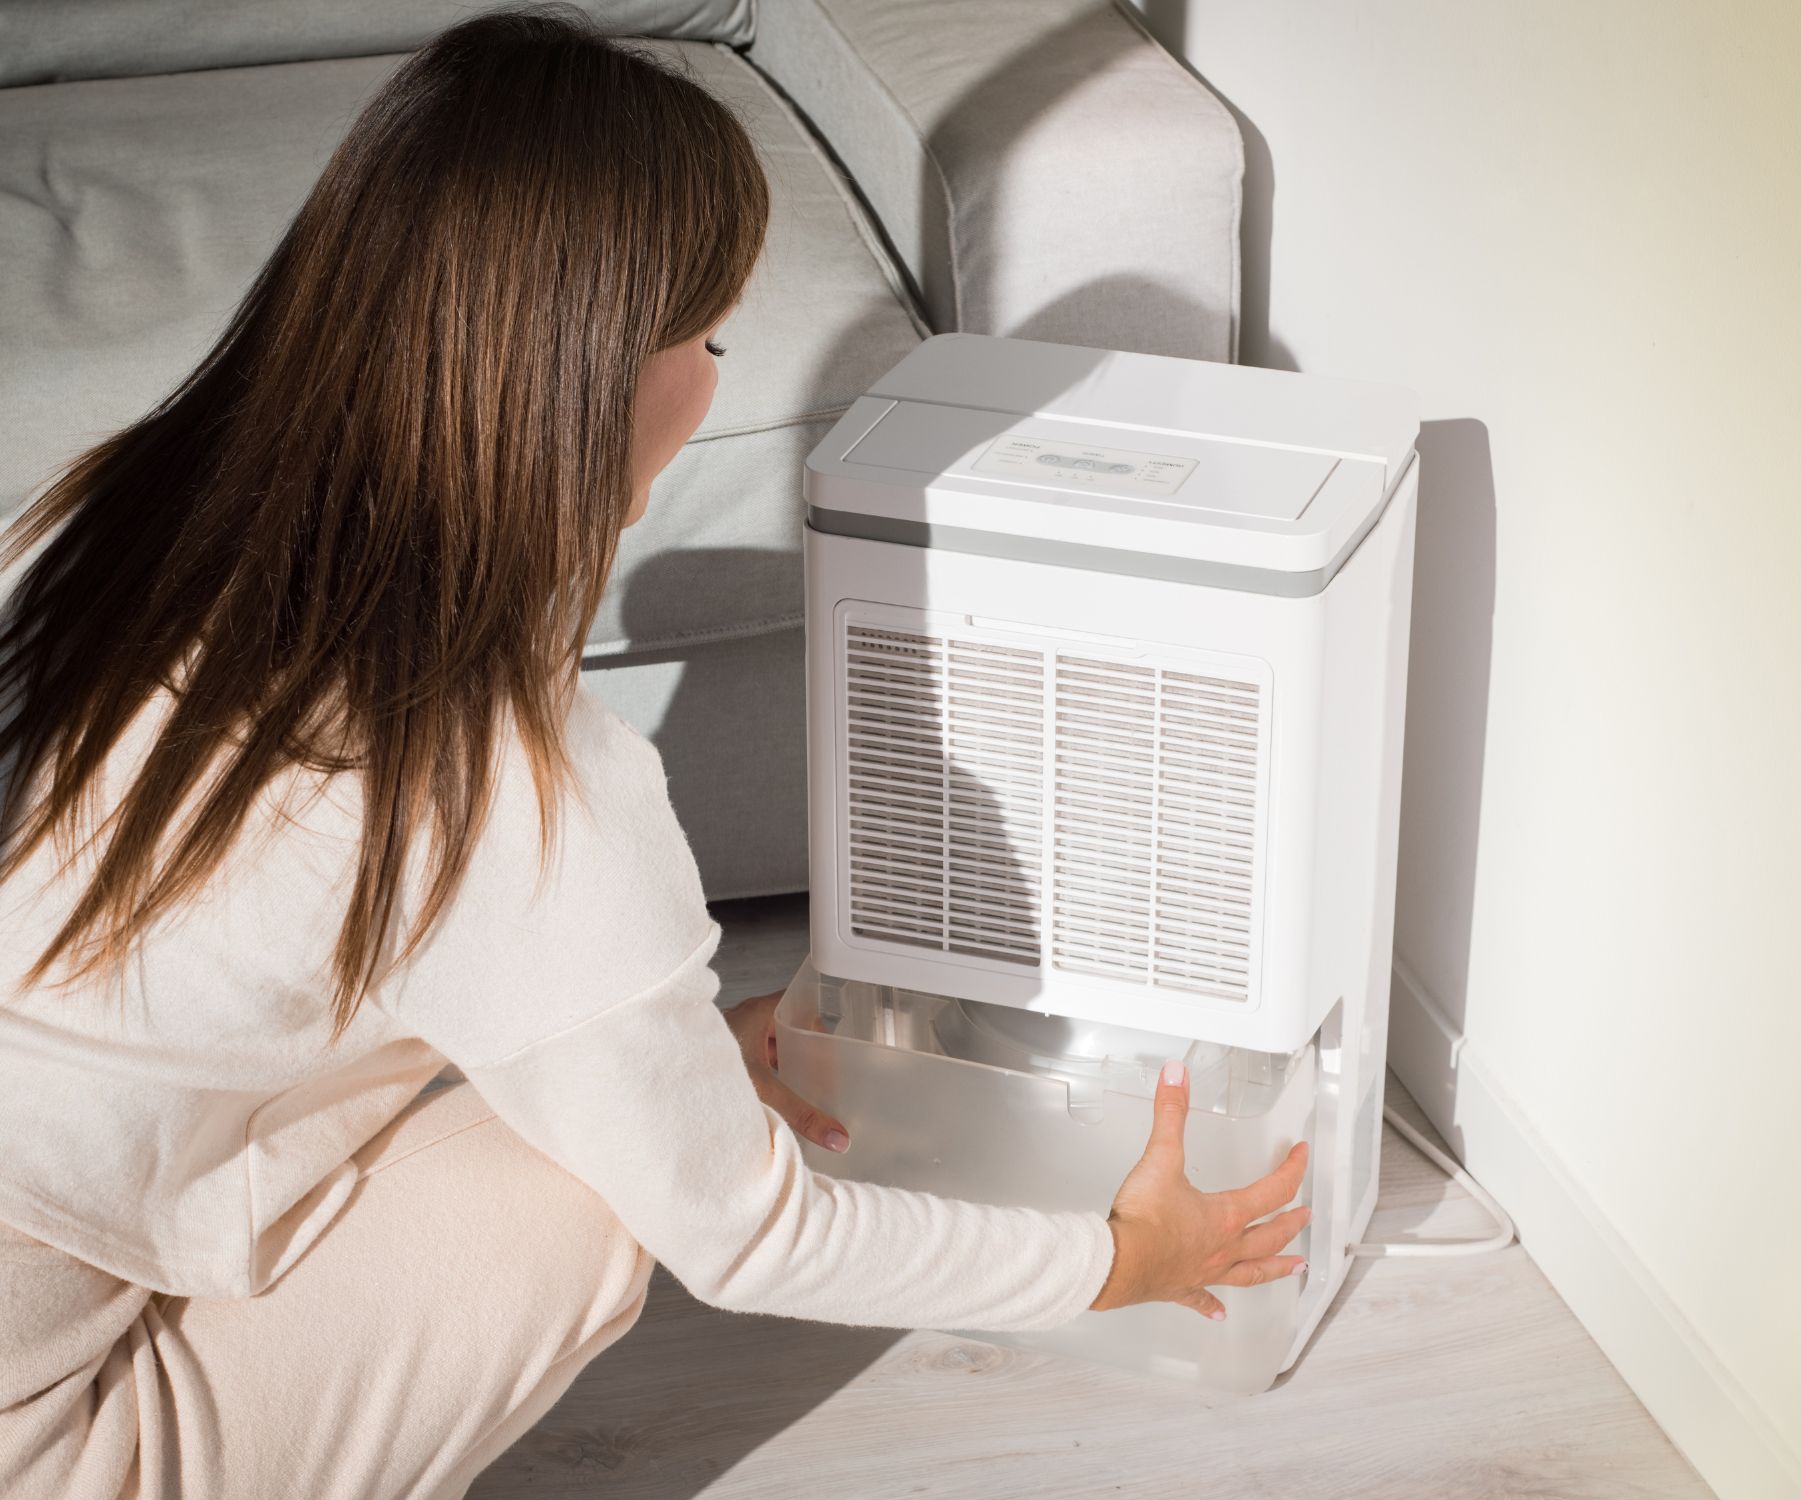 are dehumidifiers safe-do they cool a room